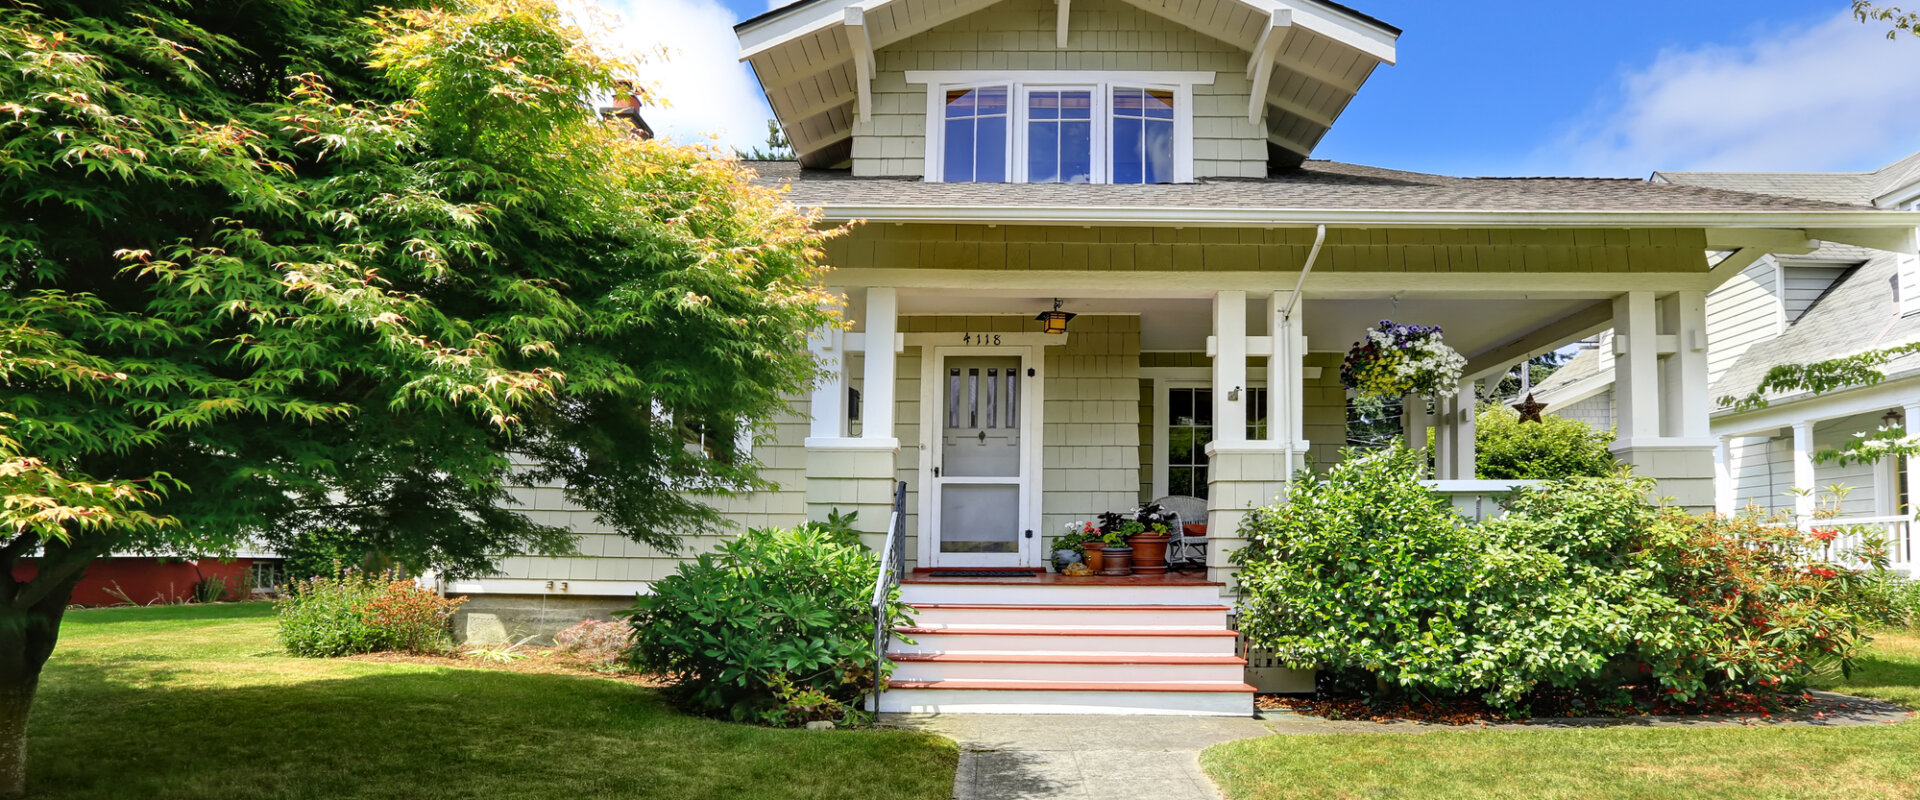 Sell Your House Fast in Bellevue